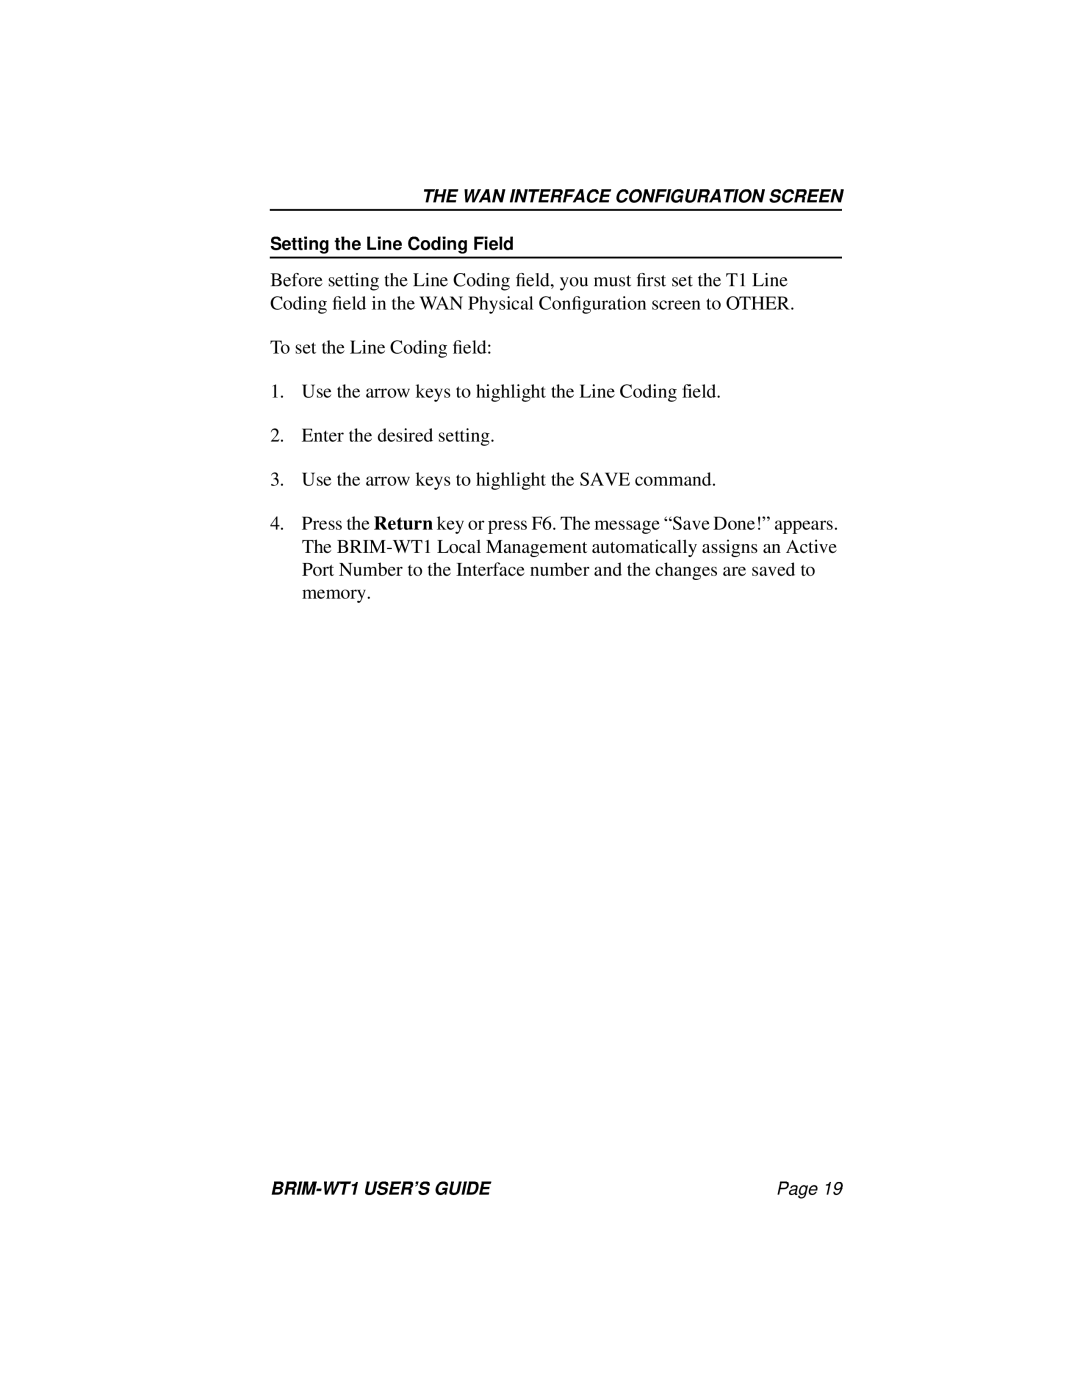 Cabletron Systems BRIM-WT1 manual Setting the Line Coding Field 